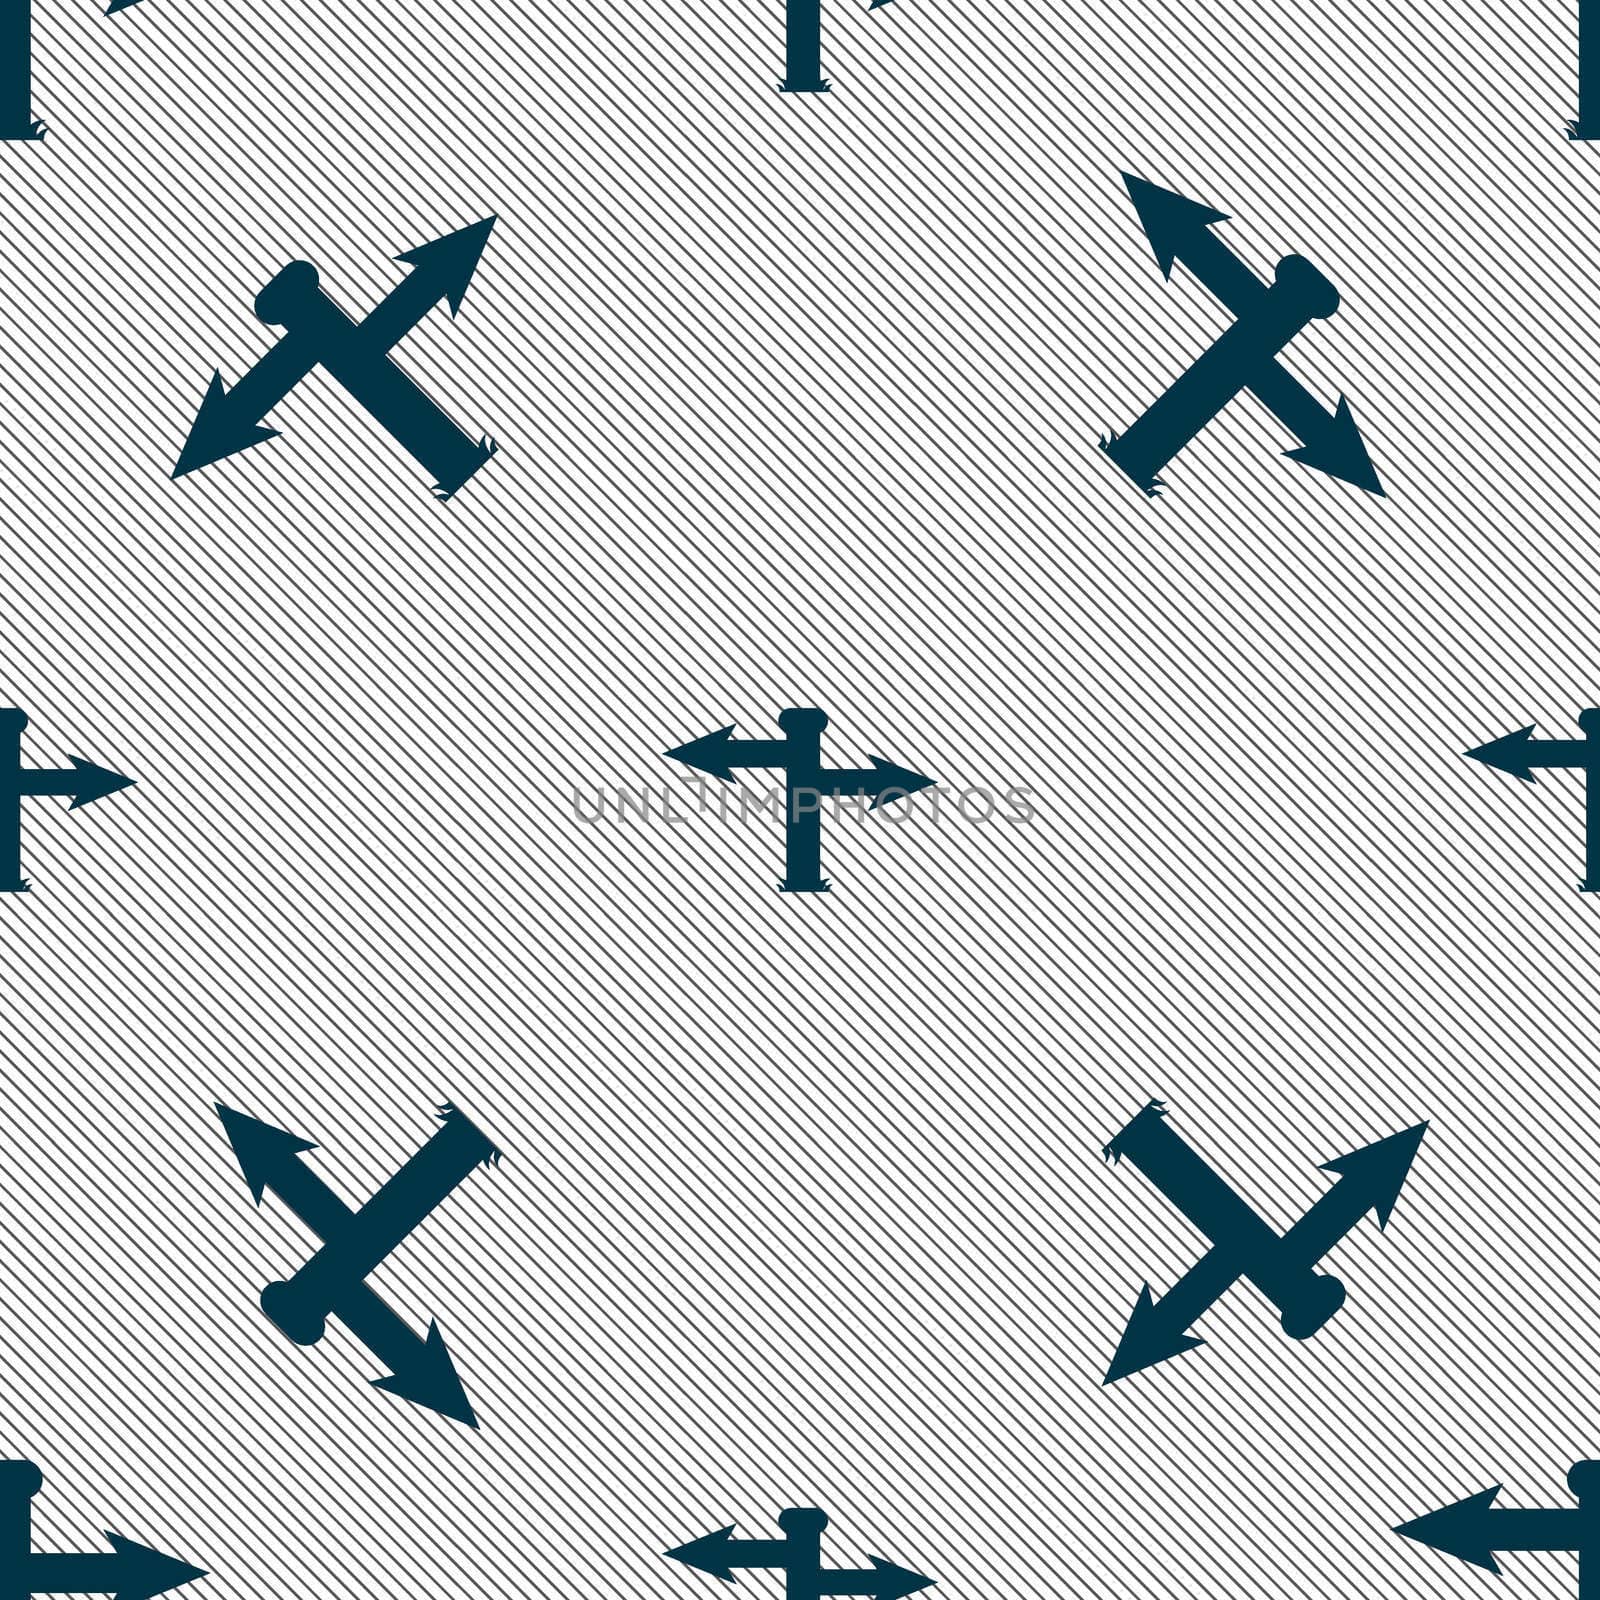 Blank Road Sign icon sign. Seamless pattern with geometric texture.  by serhii_lohvyniuk